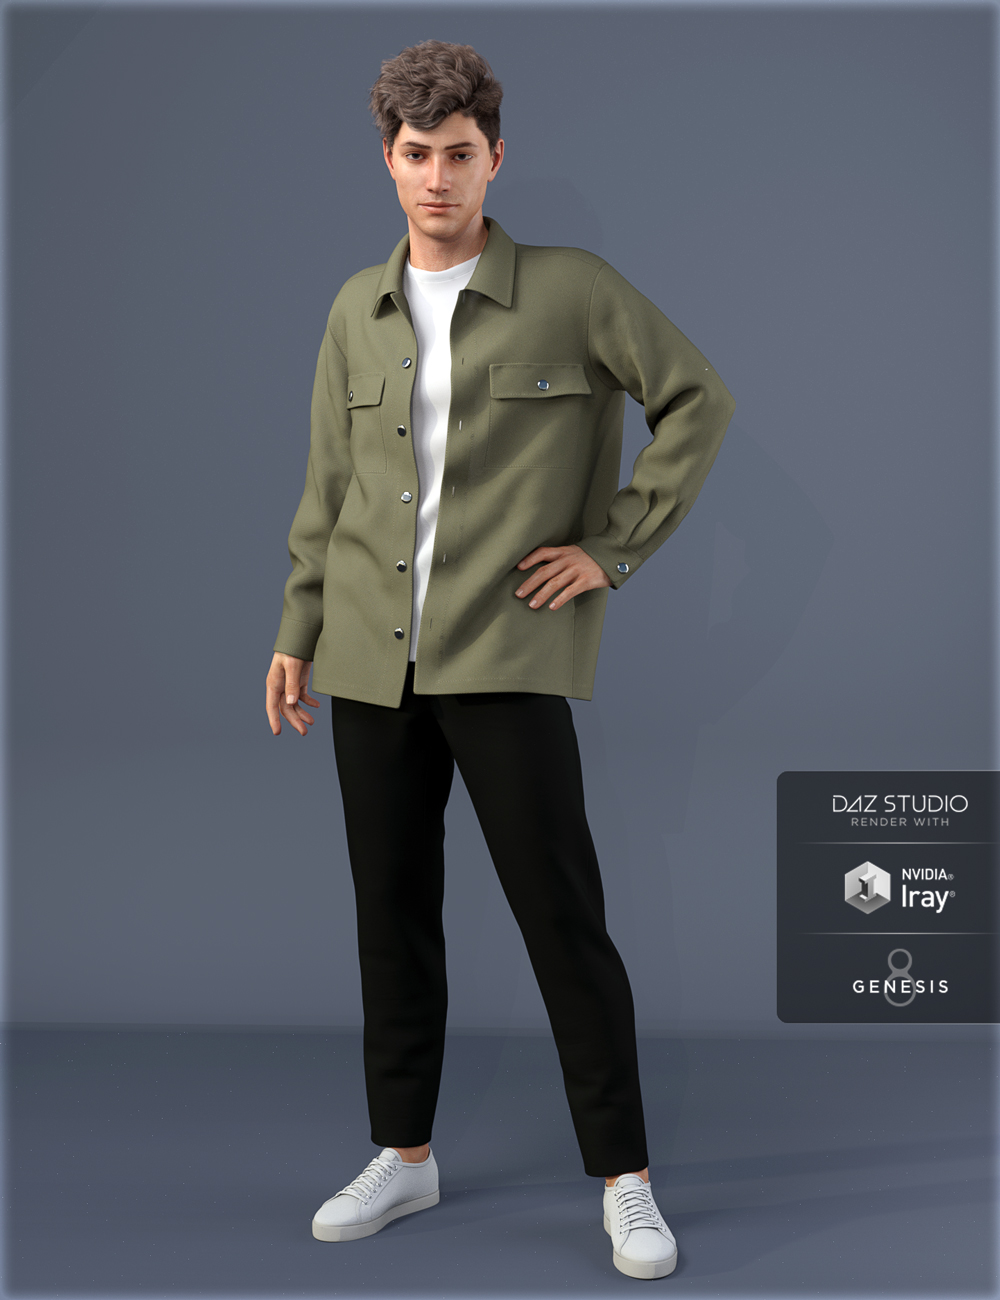 dForce HnC Shirt Jacket Outfit for Genesis 8 Males by: IH Kang, 3D Models by Daz 3D